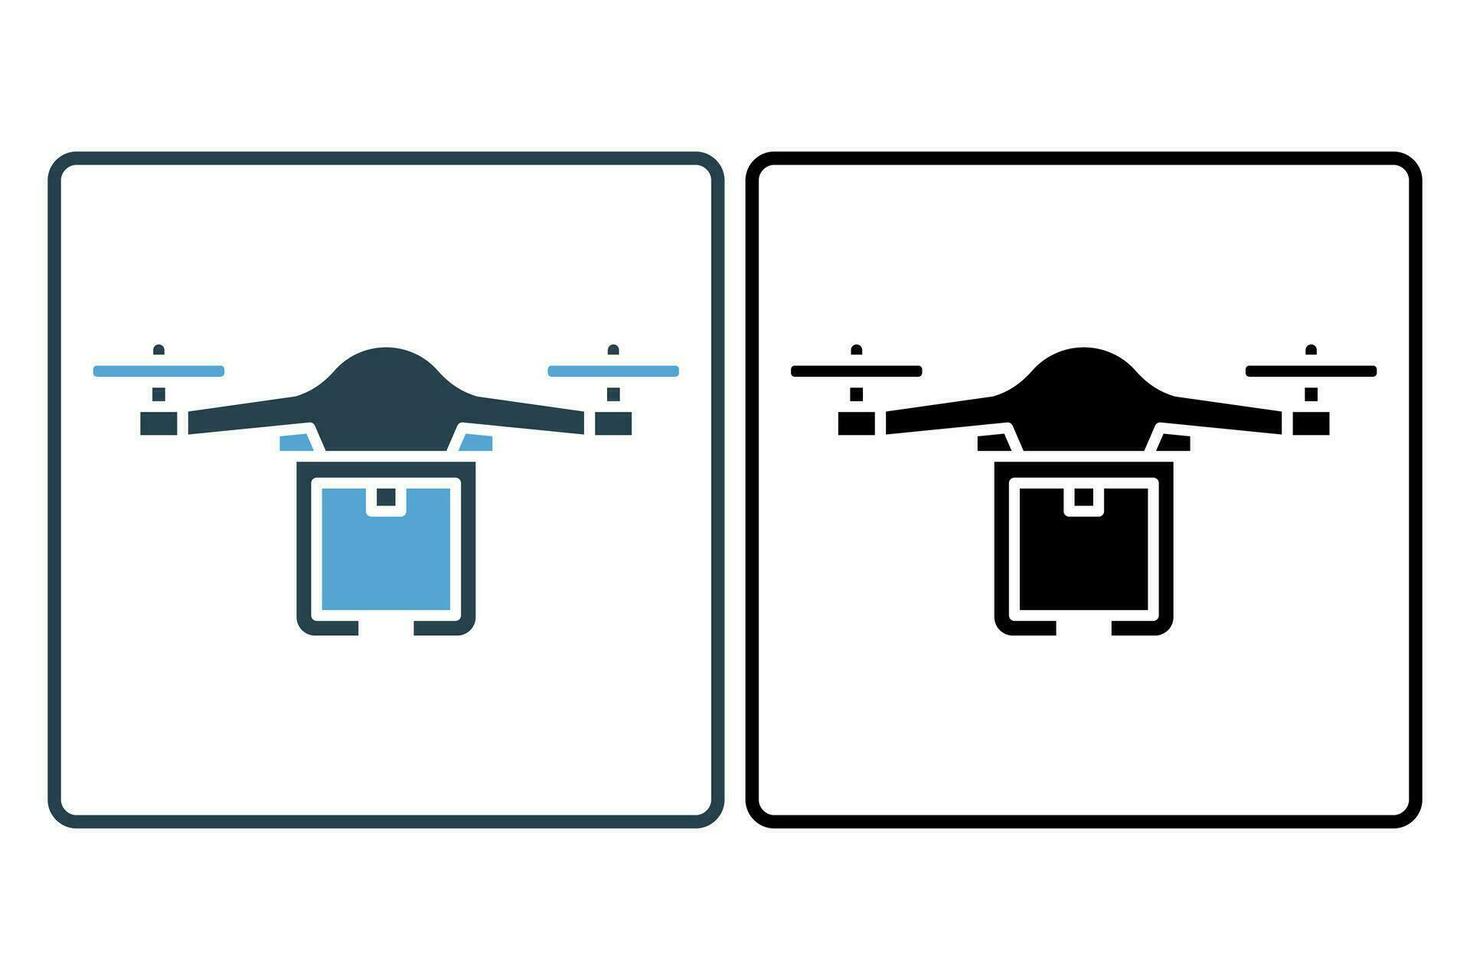 Delivery Drone Icon. Icon related to Delivery. suitable for web site, app, user interfaces, printable etc. flat line icon style. Simple vector design editable